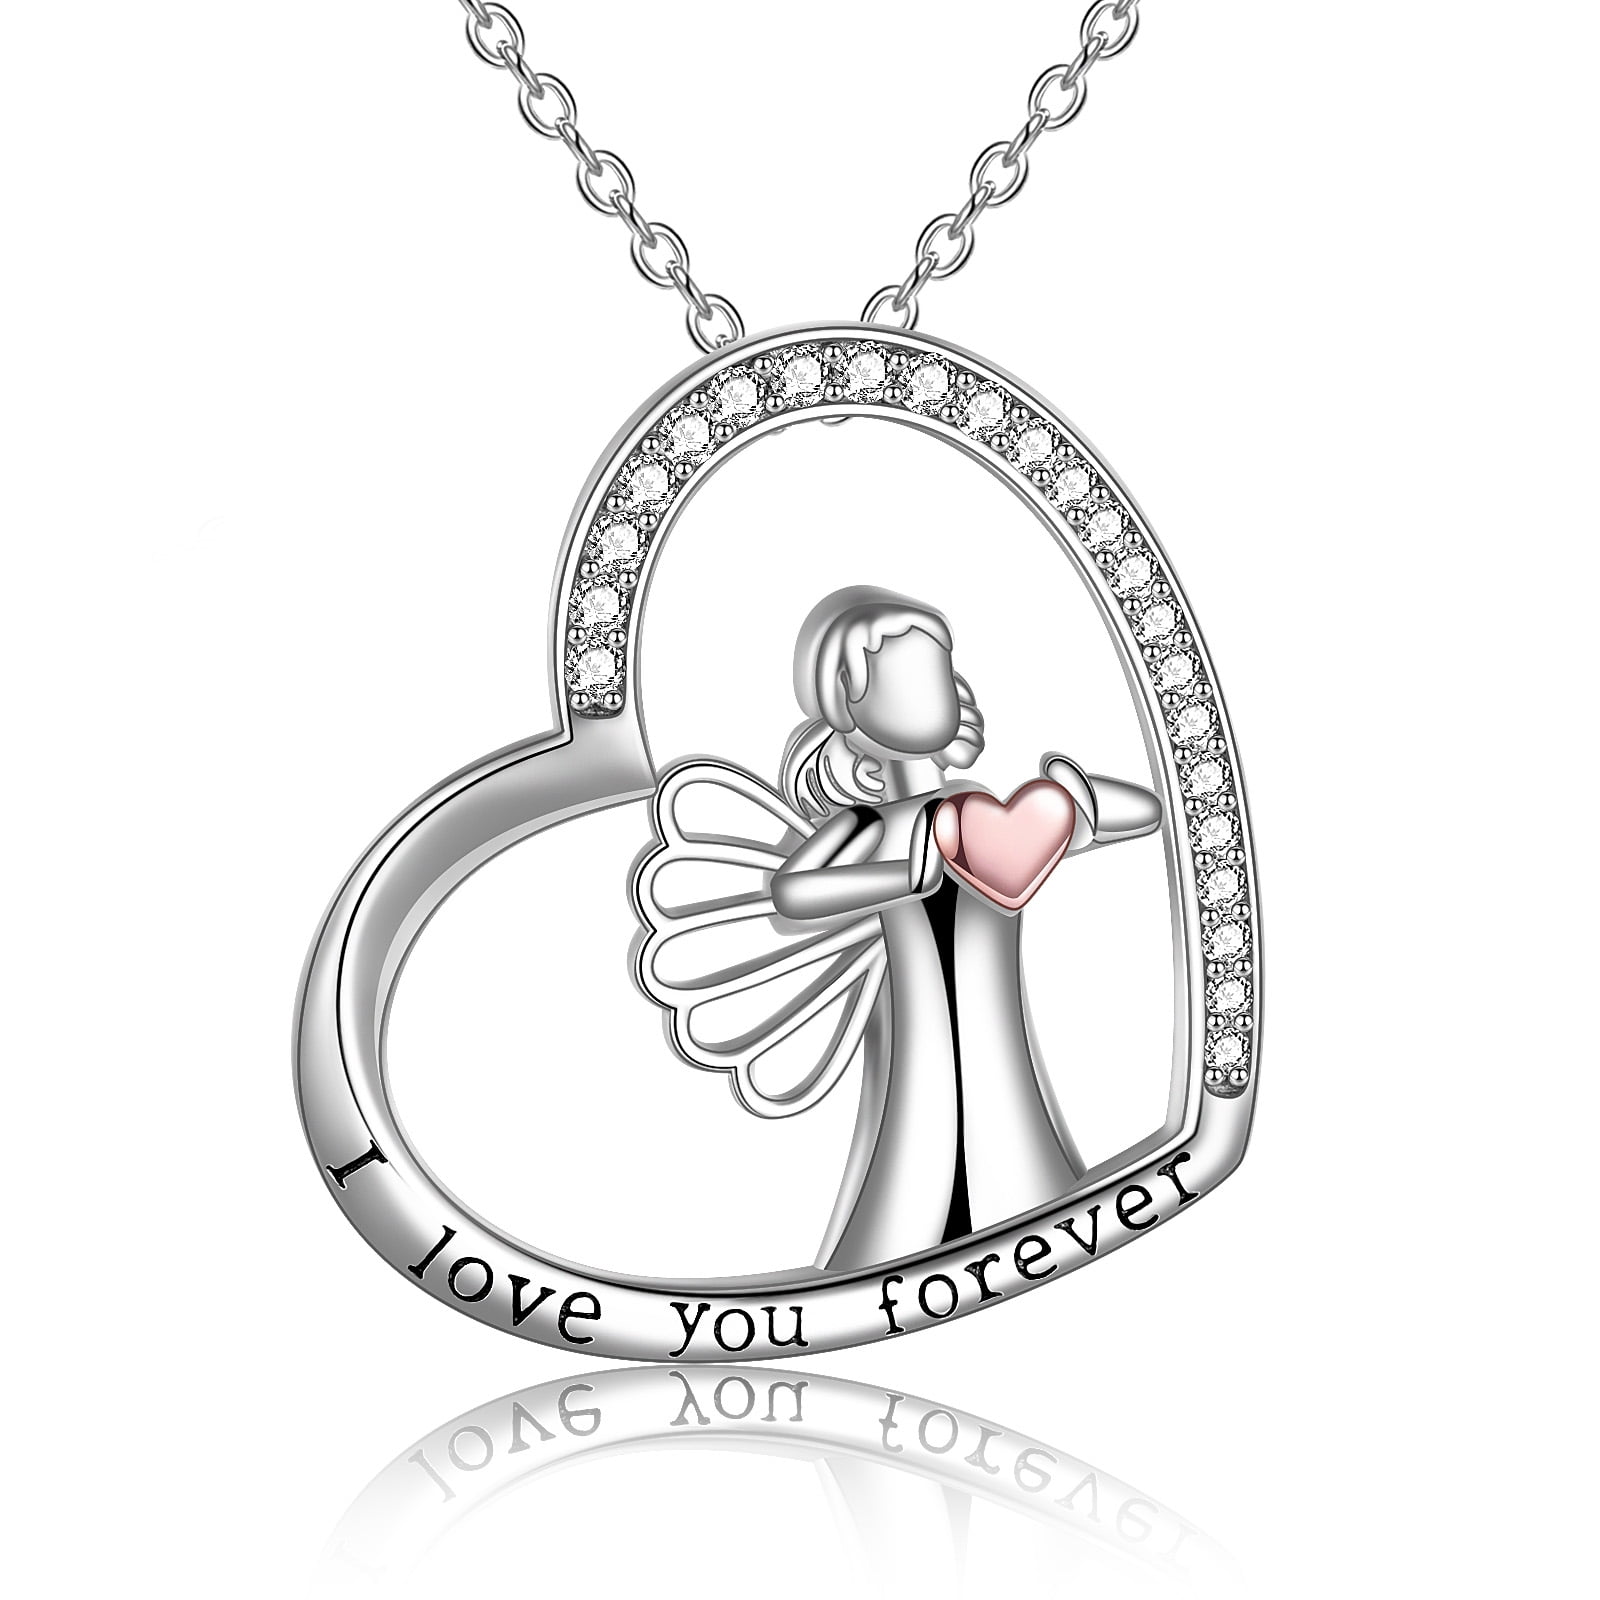 Silver Tone Guardian Angel Pendant Necklace with Crystal Effect Heart Pendant 